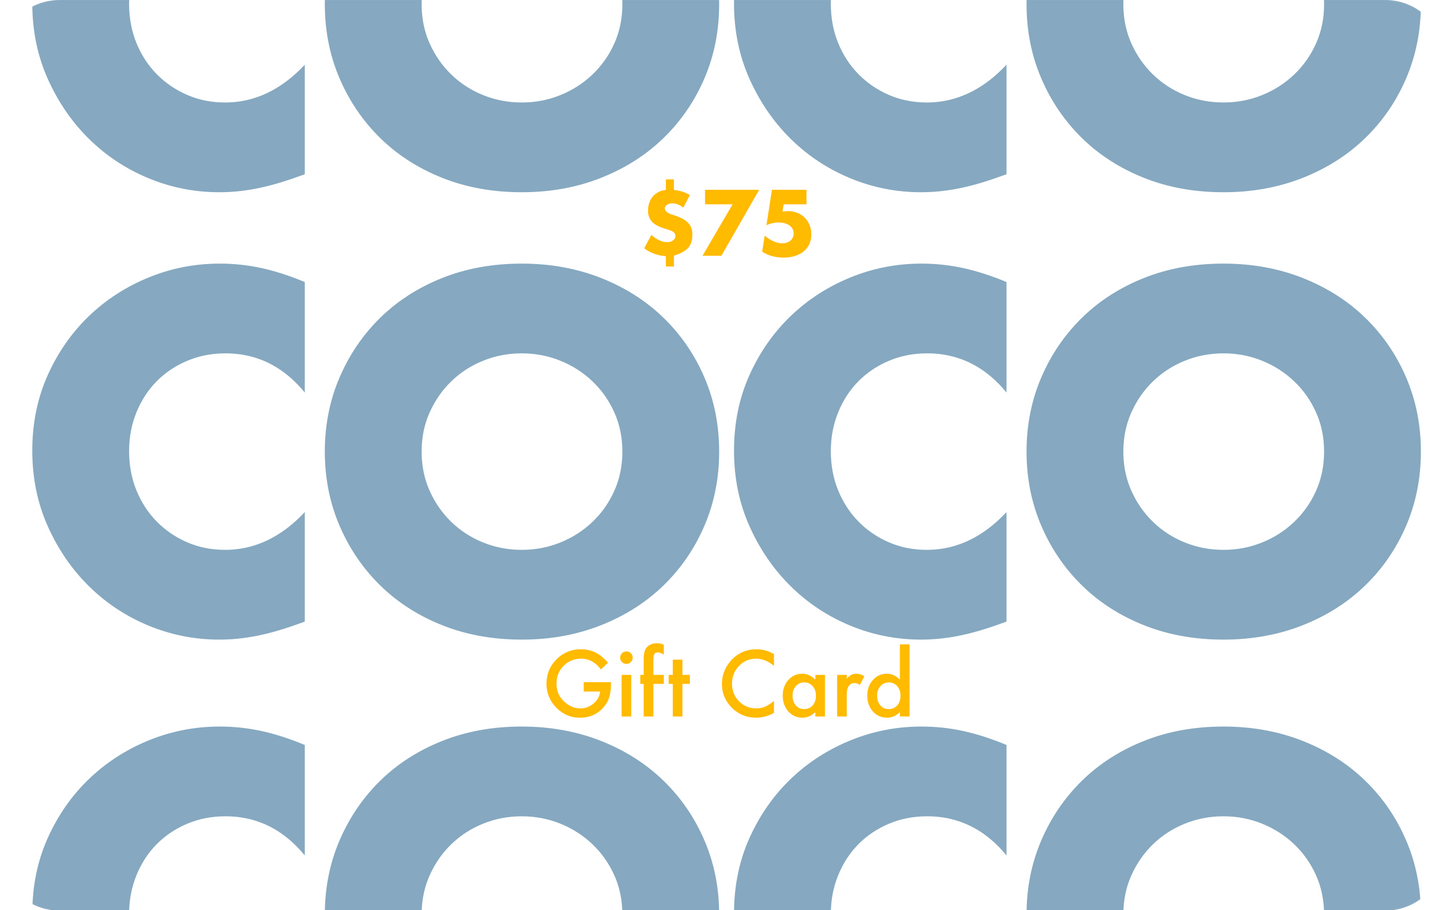 COCo Gift Card